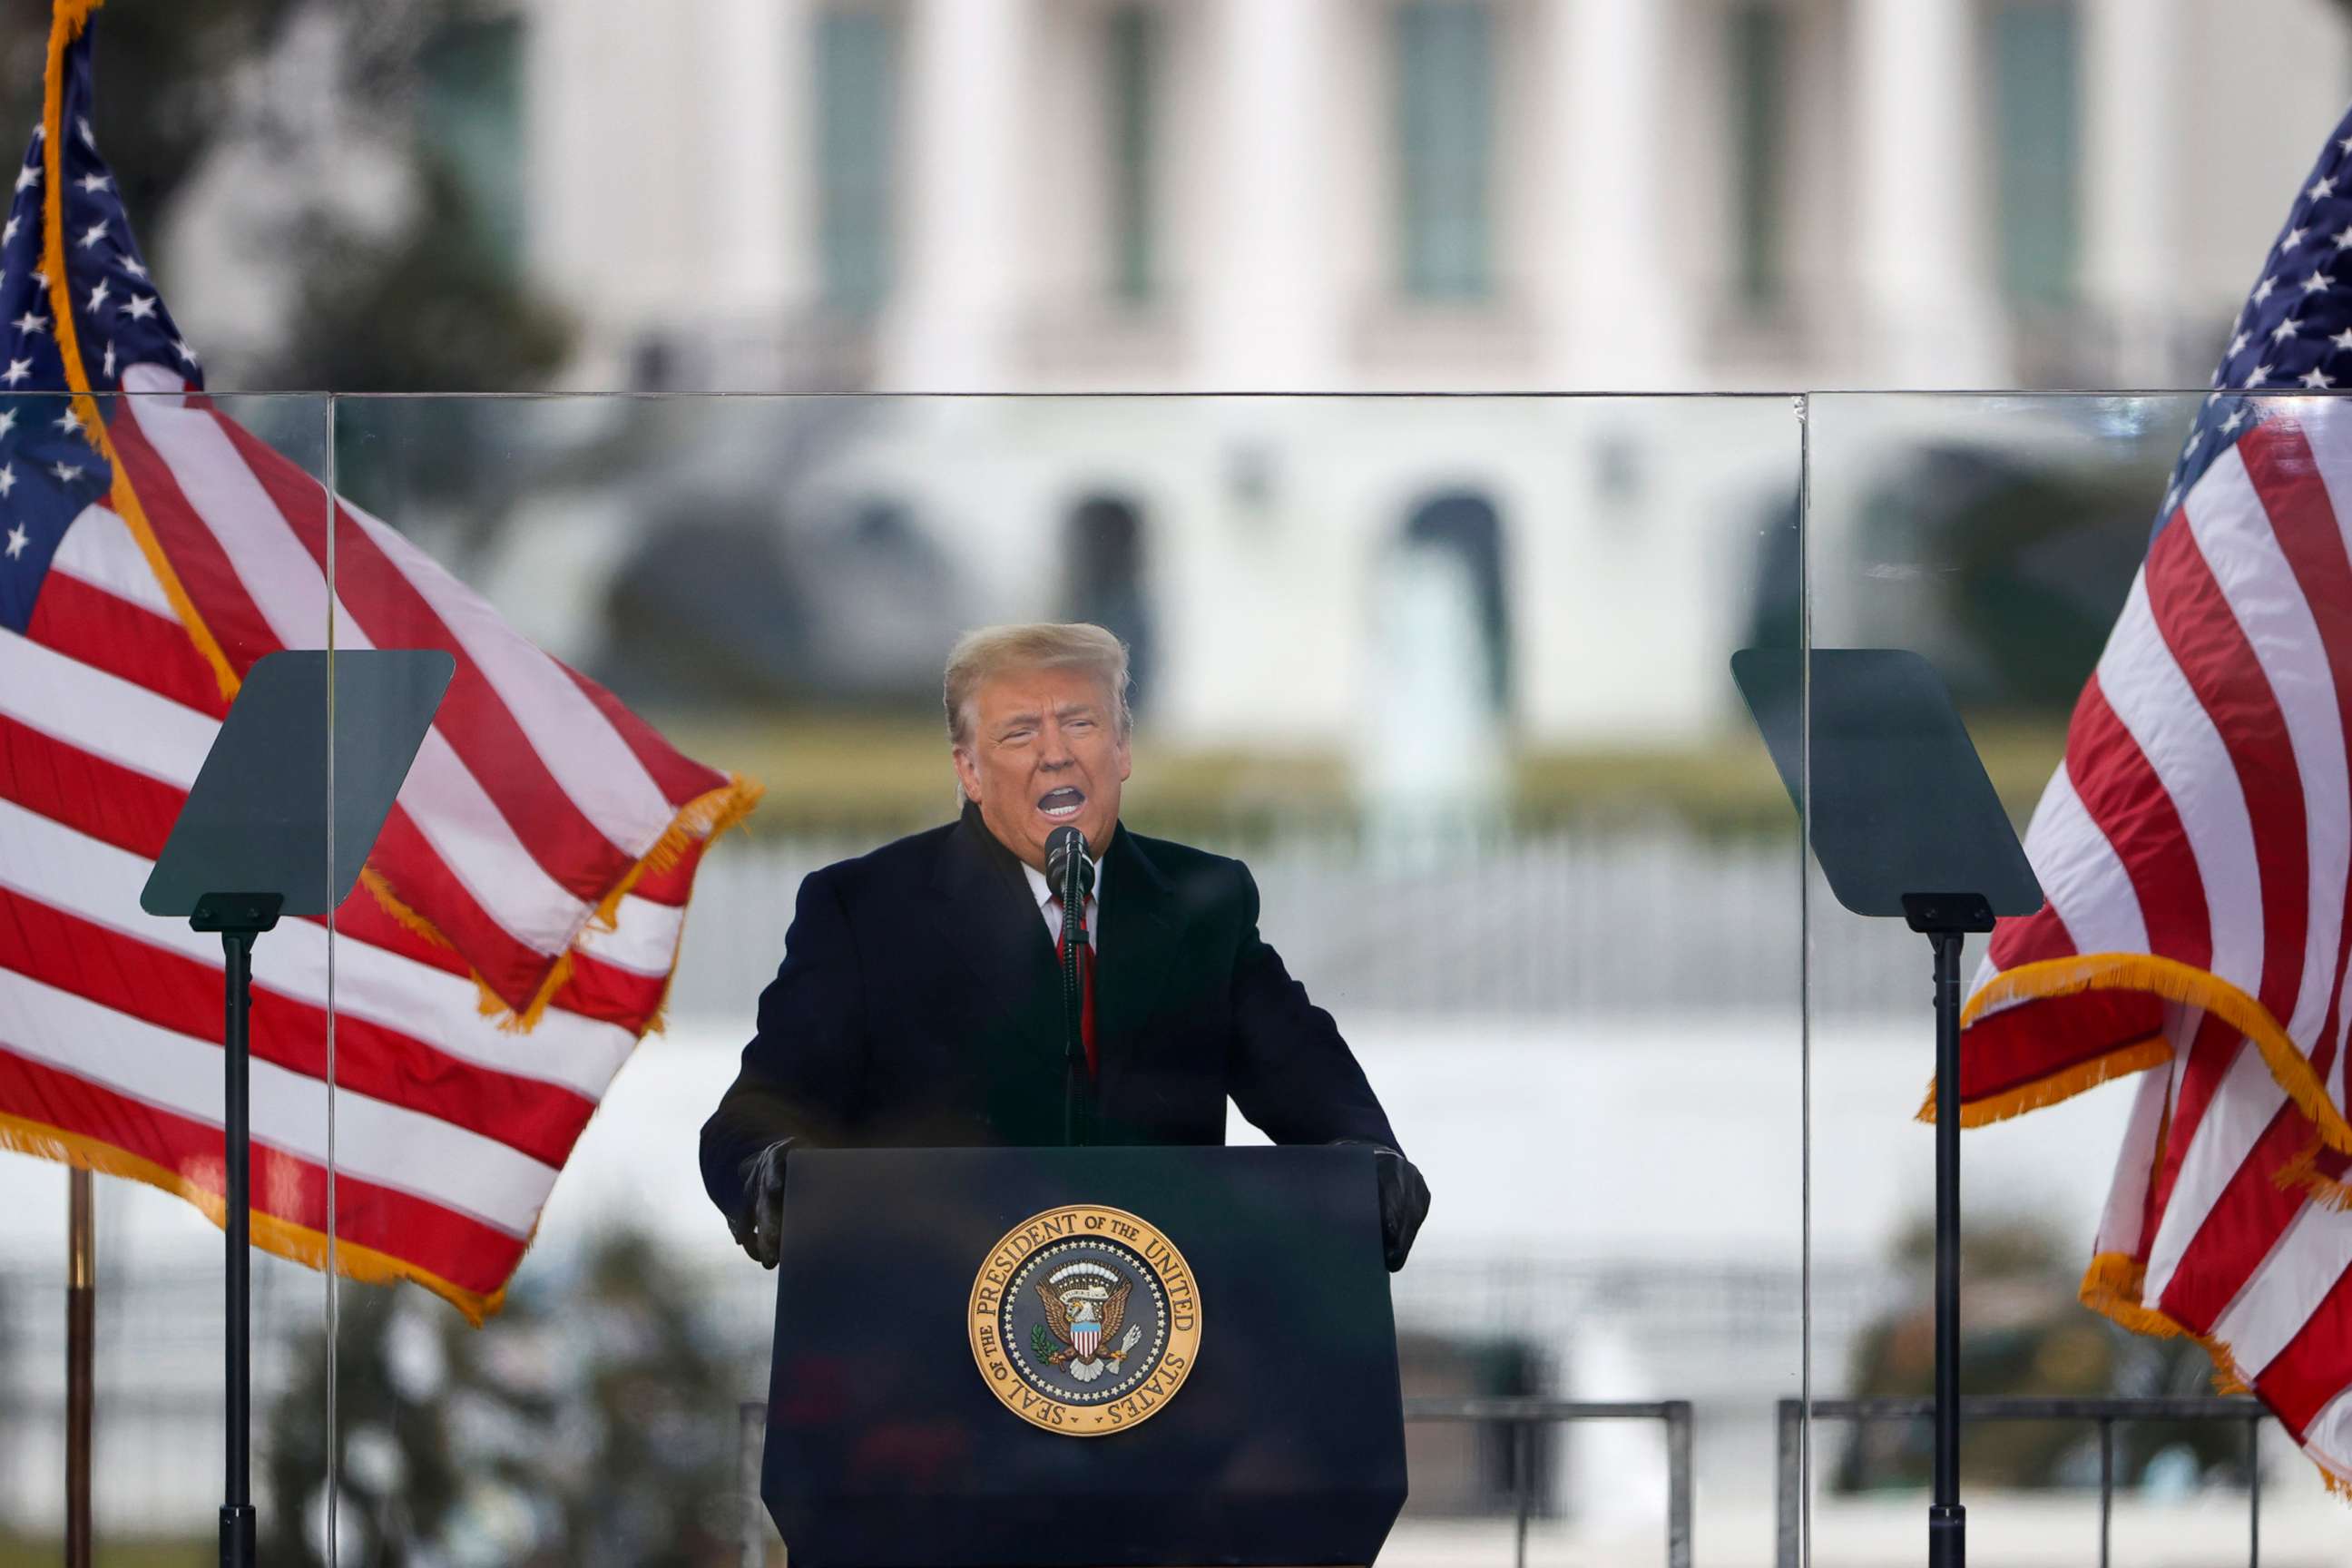 PHOTO: In this Jan. 6, 2021, file photo, President Donald Trump speaks at the "Stop The Steal" Rally in Washington, D.C.